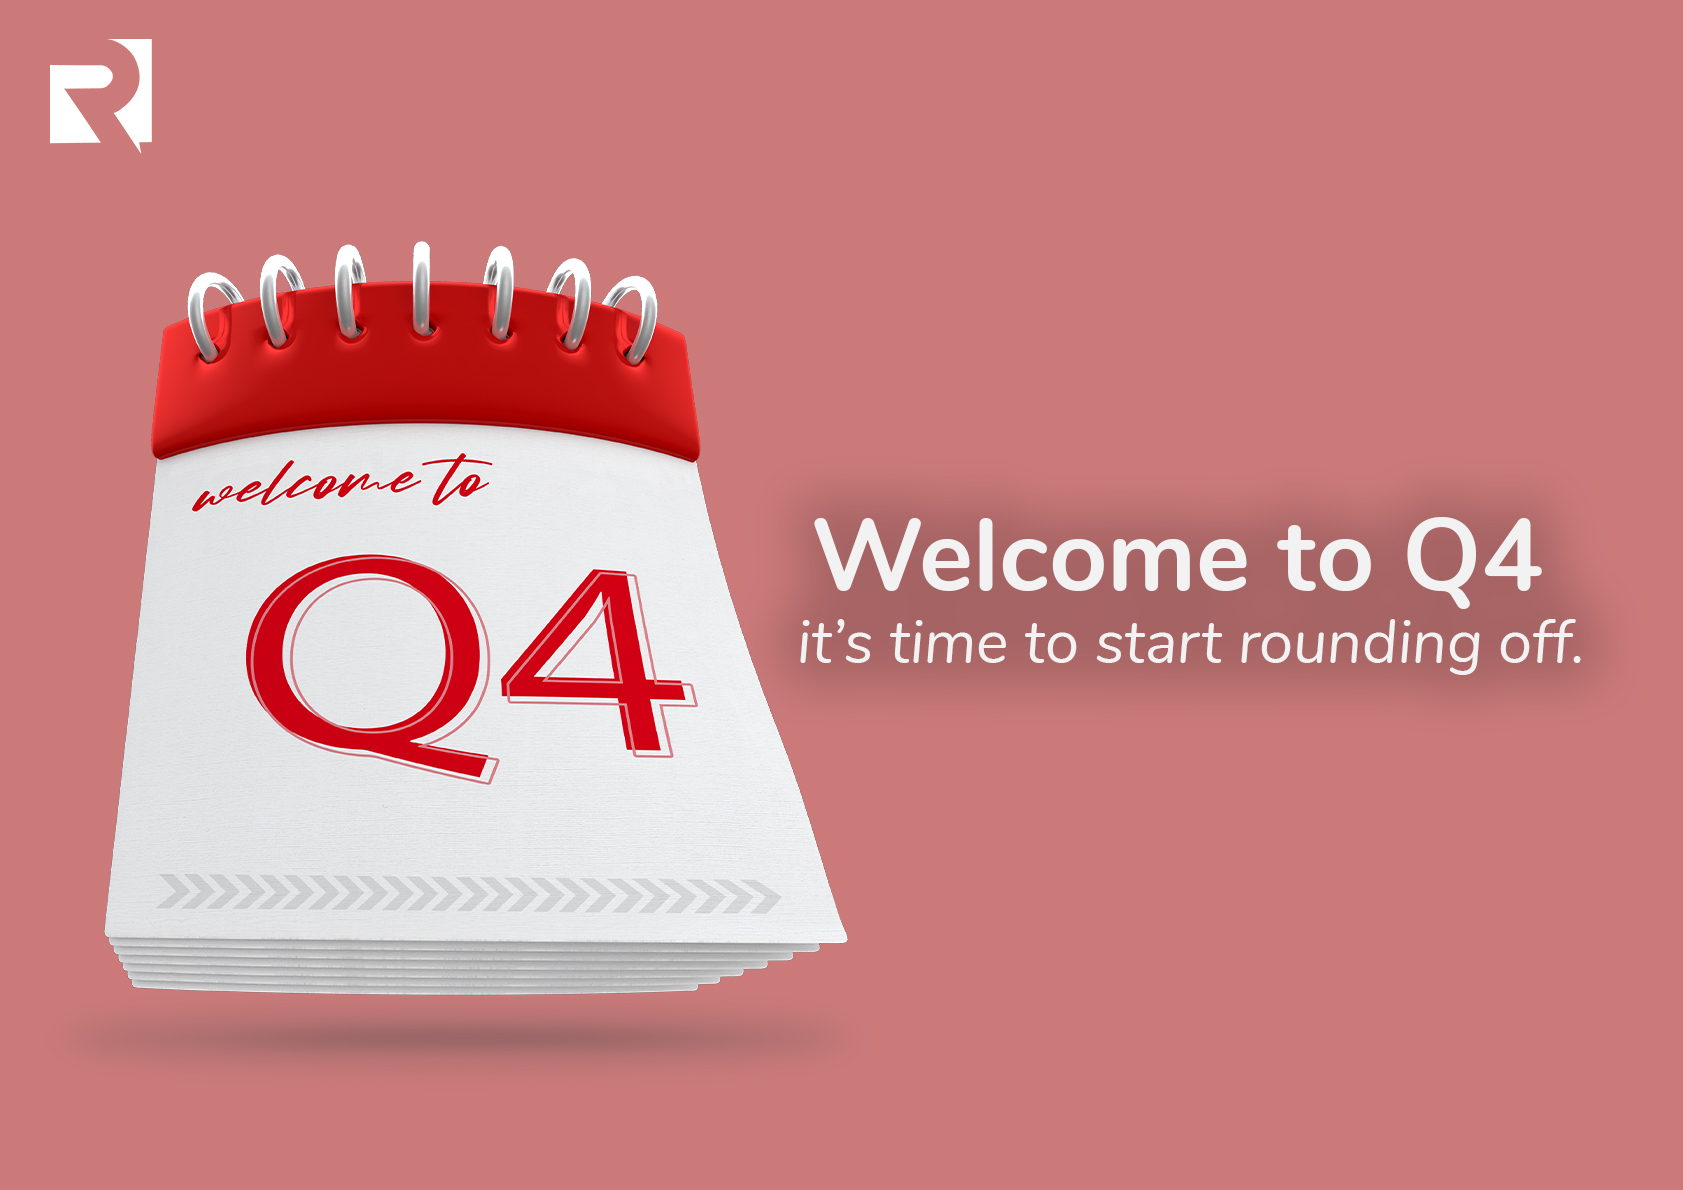 Welcome to Q4